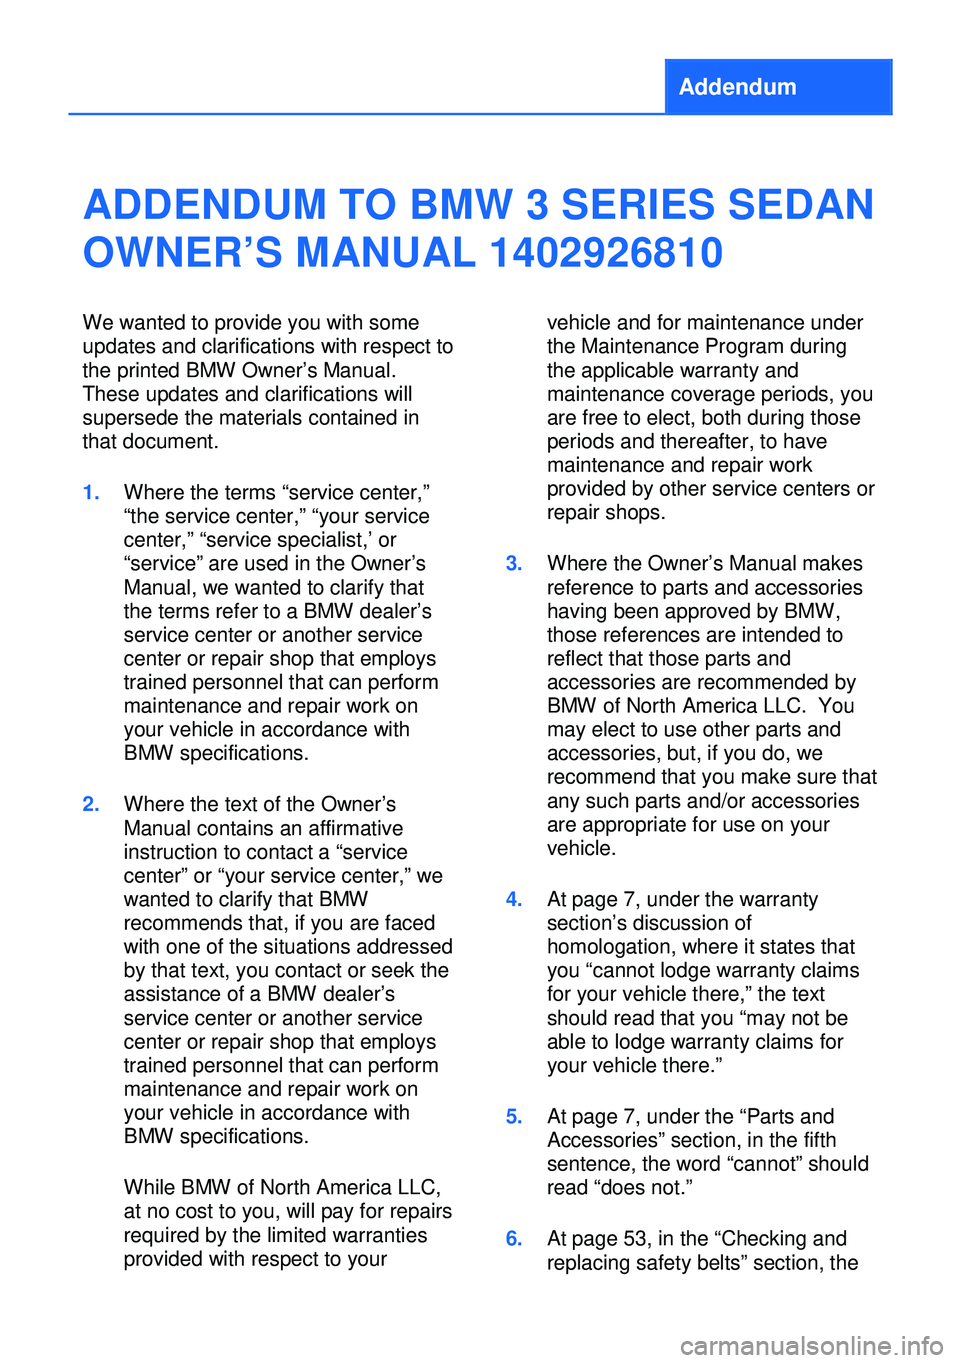 BMW 335I XDRIVE SEDAN 2013  Owners Manual Addendum
ADDENDUM TO BMW 3 SERIES SEDAN
OWNER’S MANUAL 1402926810
We wanted to provide you with some
updates and clarifications with respect to
the printed BMW Owner’s Manual.
These updates and cl